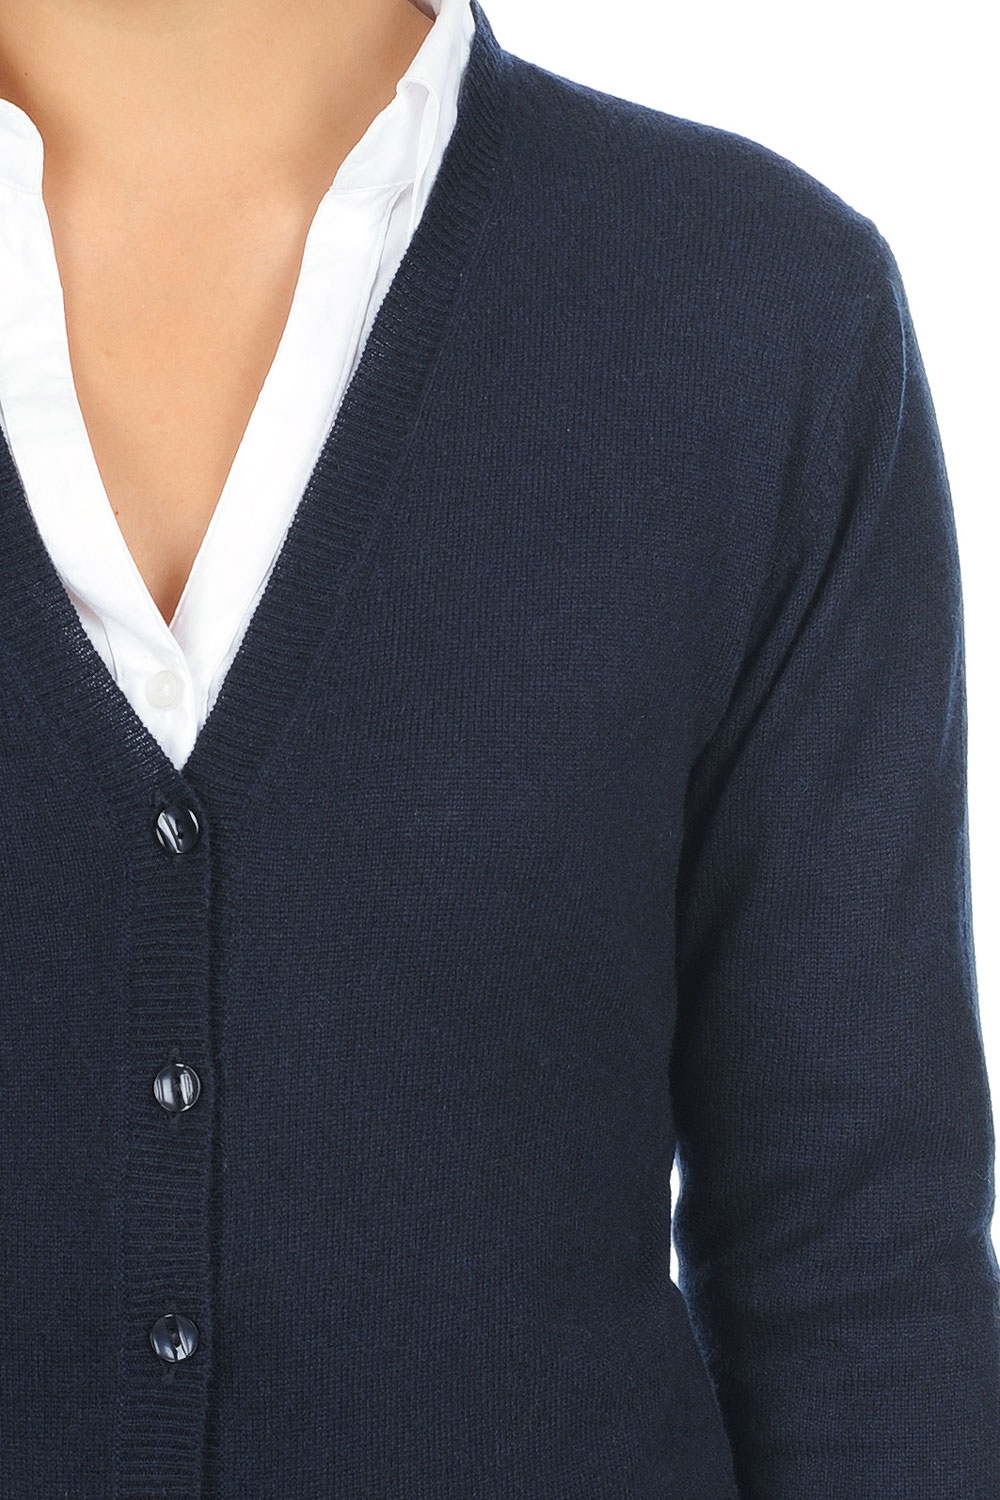 Cashmere ladies basic sweaters at low prices taline dress blue m